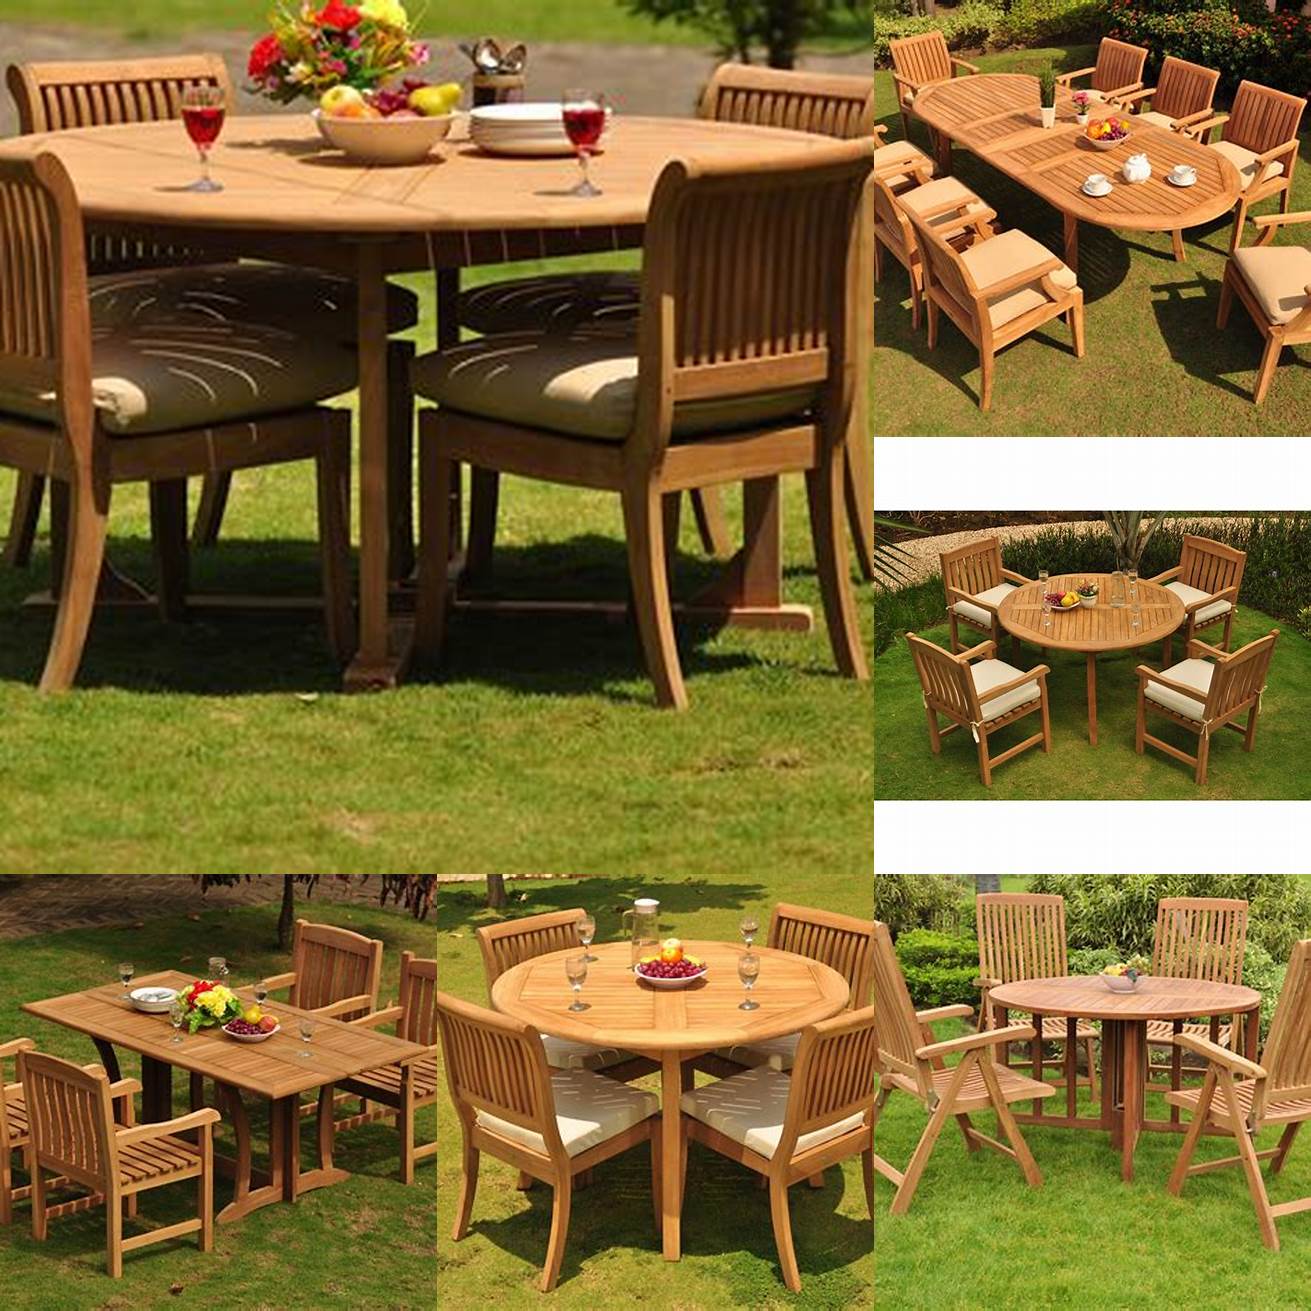 Outdoor Teak Table and Chairs